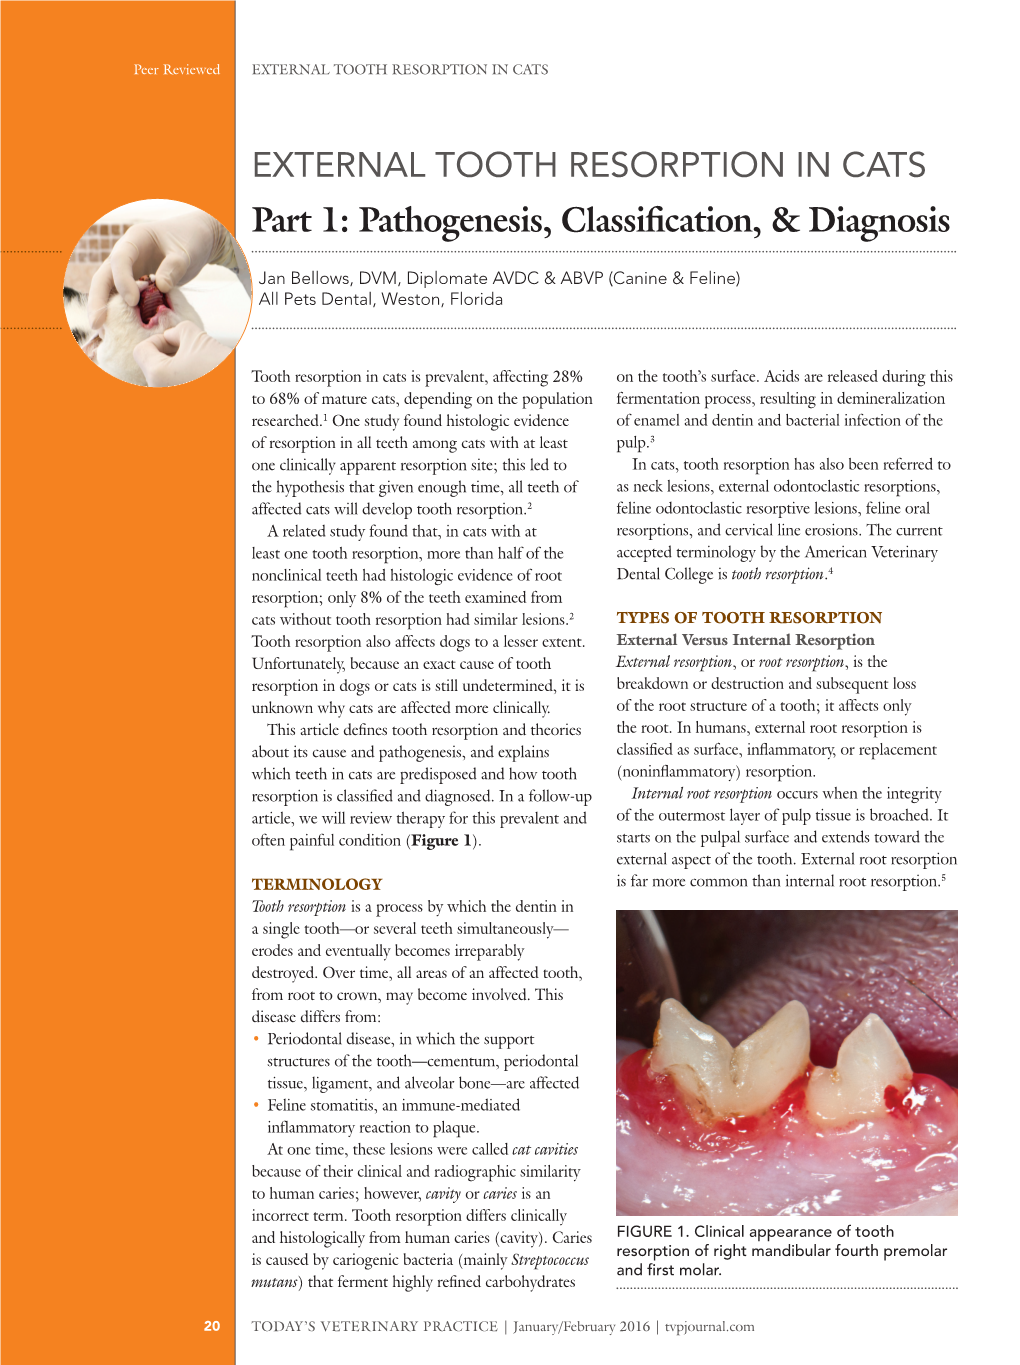 External Tooth Resorption in Cats Part 1: Pathogenesis, Classification, & Diagnosis